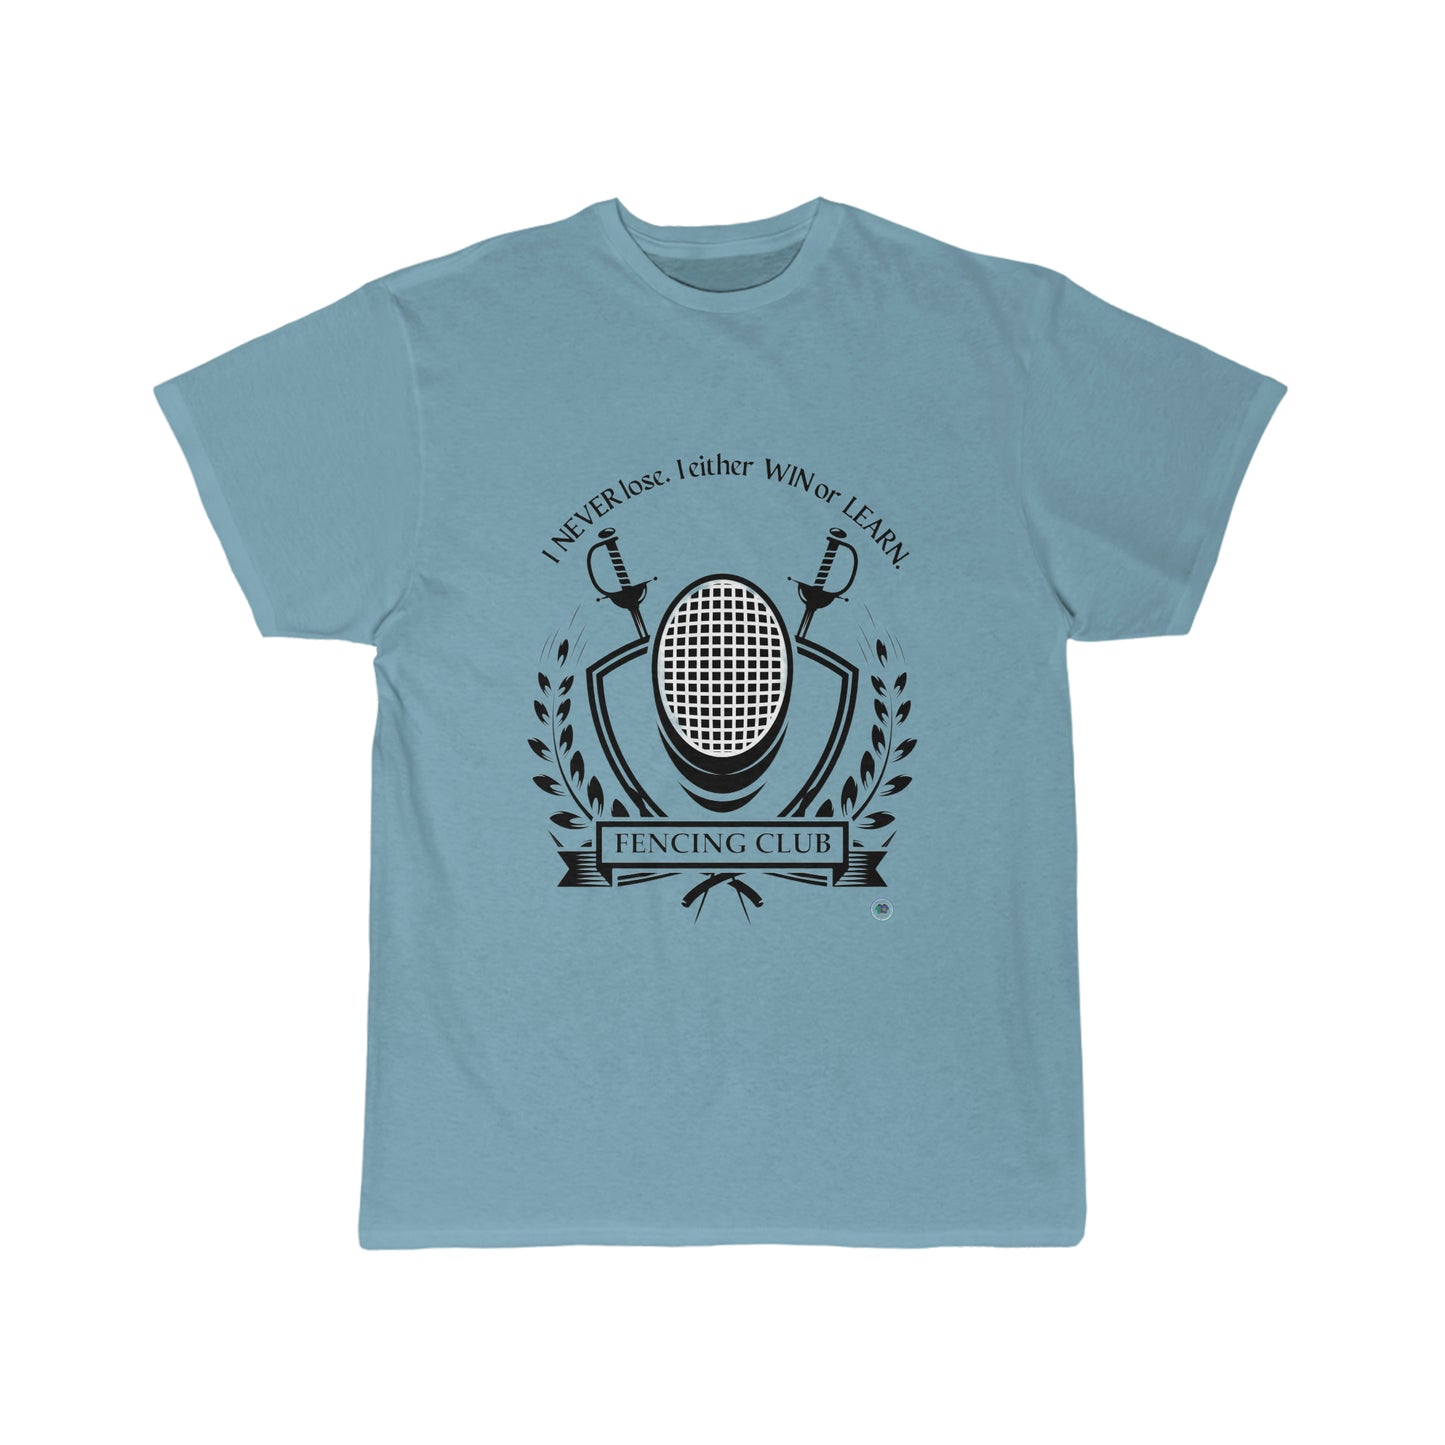 ‘Fencing. I never lose. I either win or learn’ Men's Short Sleeve Tee